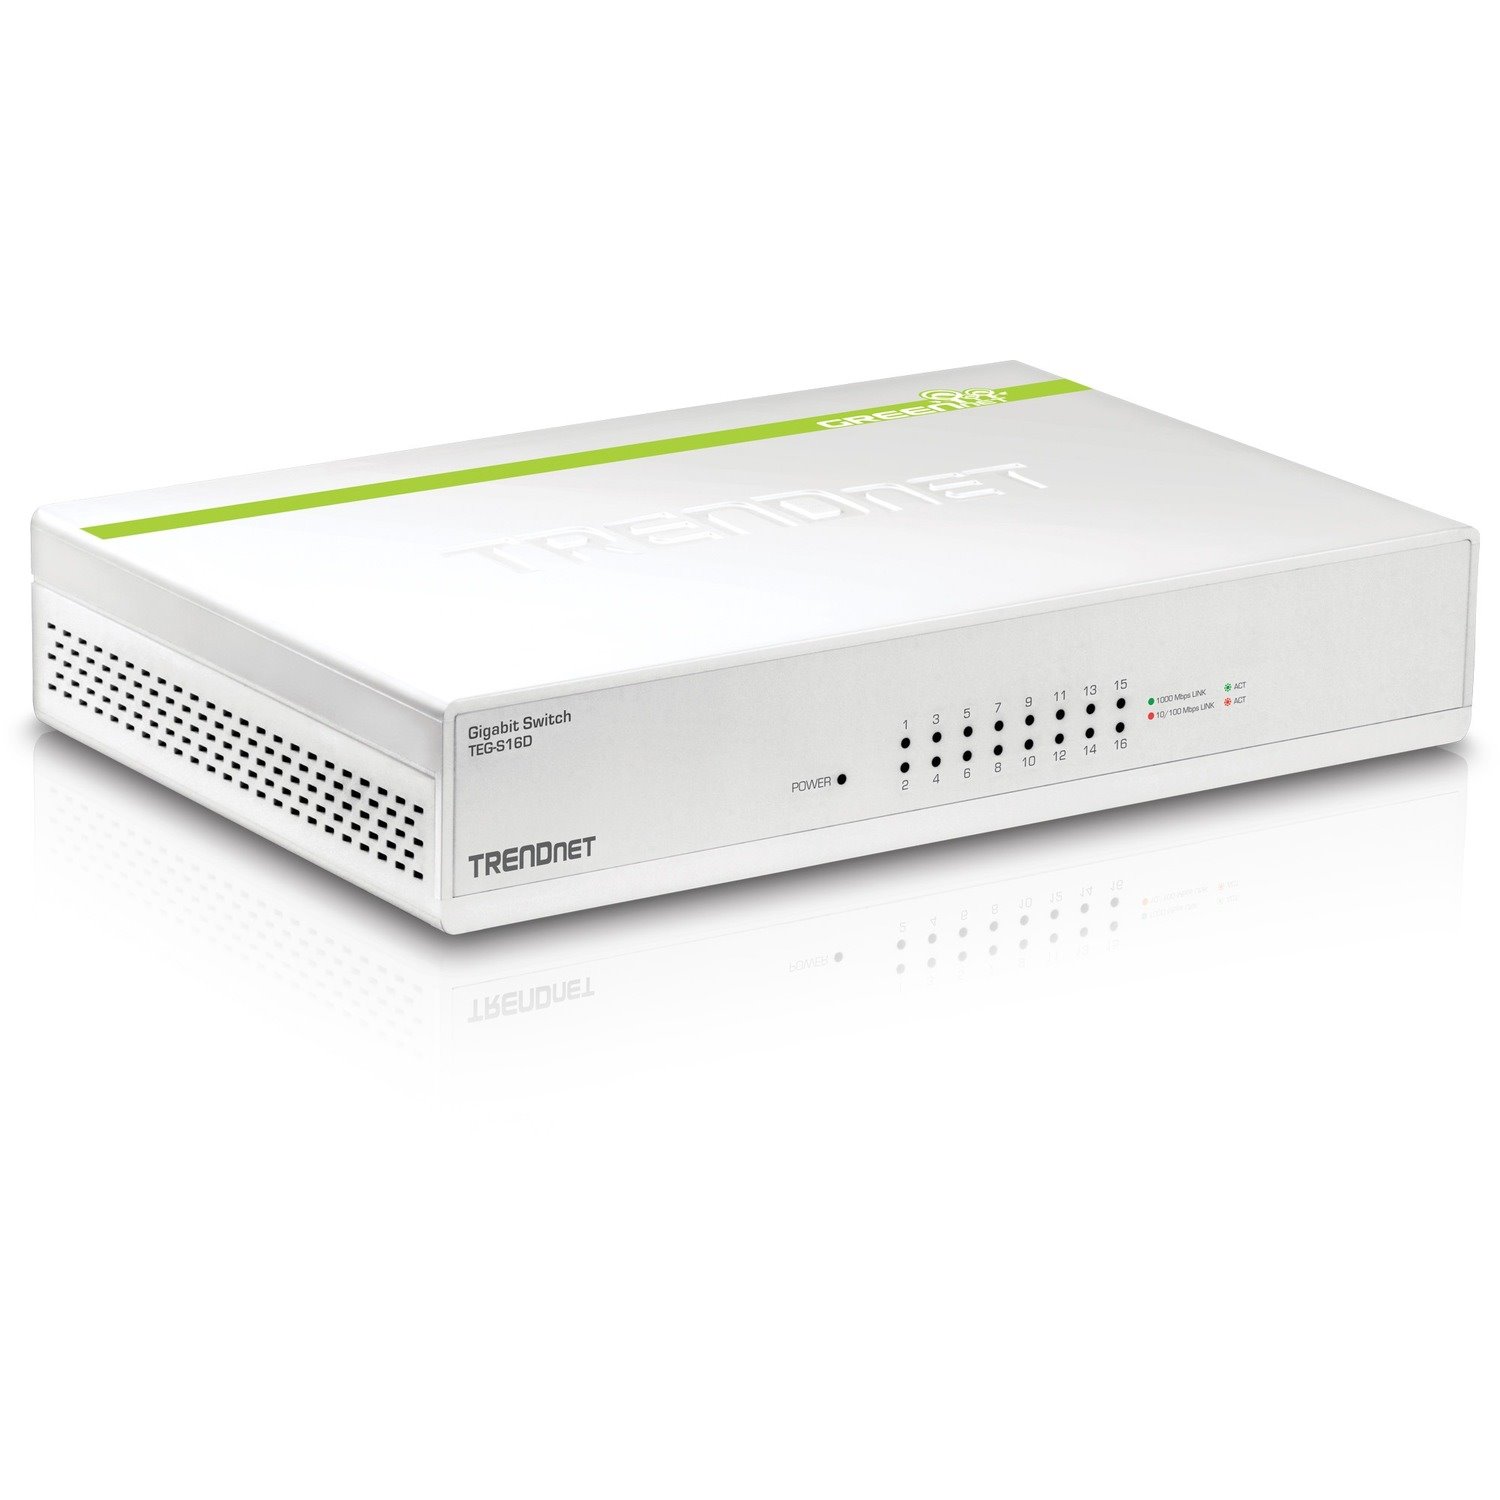 TRENDnet 16-Port Gigabit GREENnet Switch, Polycarbonate, QoS Prioritization, 32 Gbps Switching Fabric, Fanless, Plug and Play, Network Ethernet Switch, Jumbo Frame Support, White, TEG-S16D